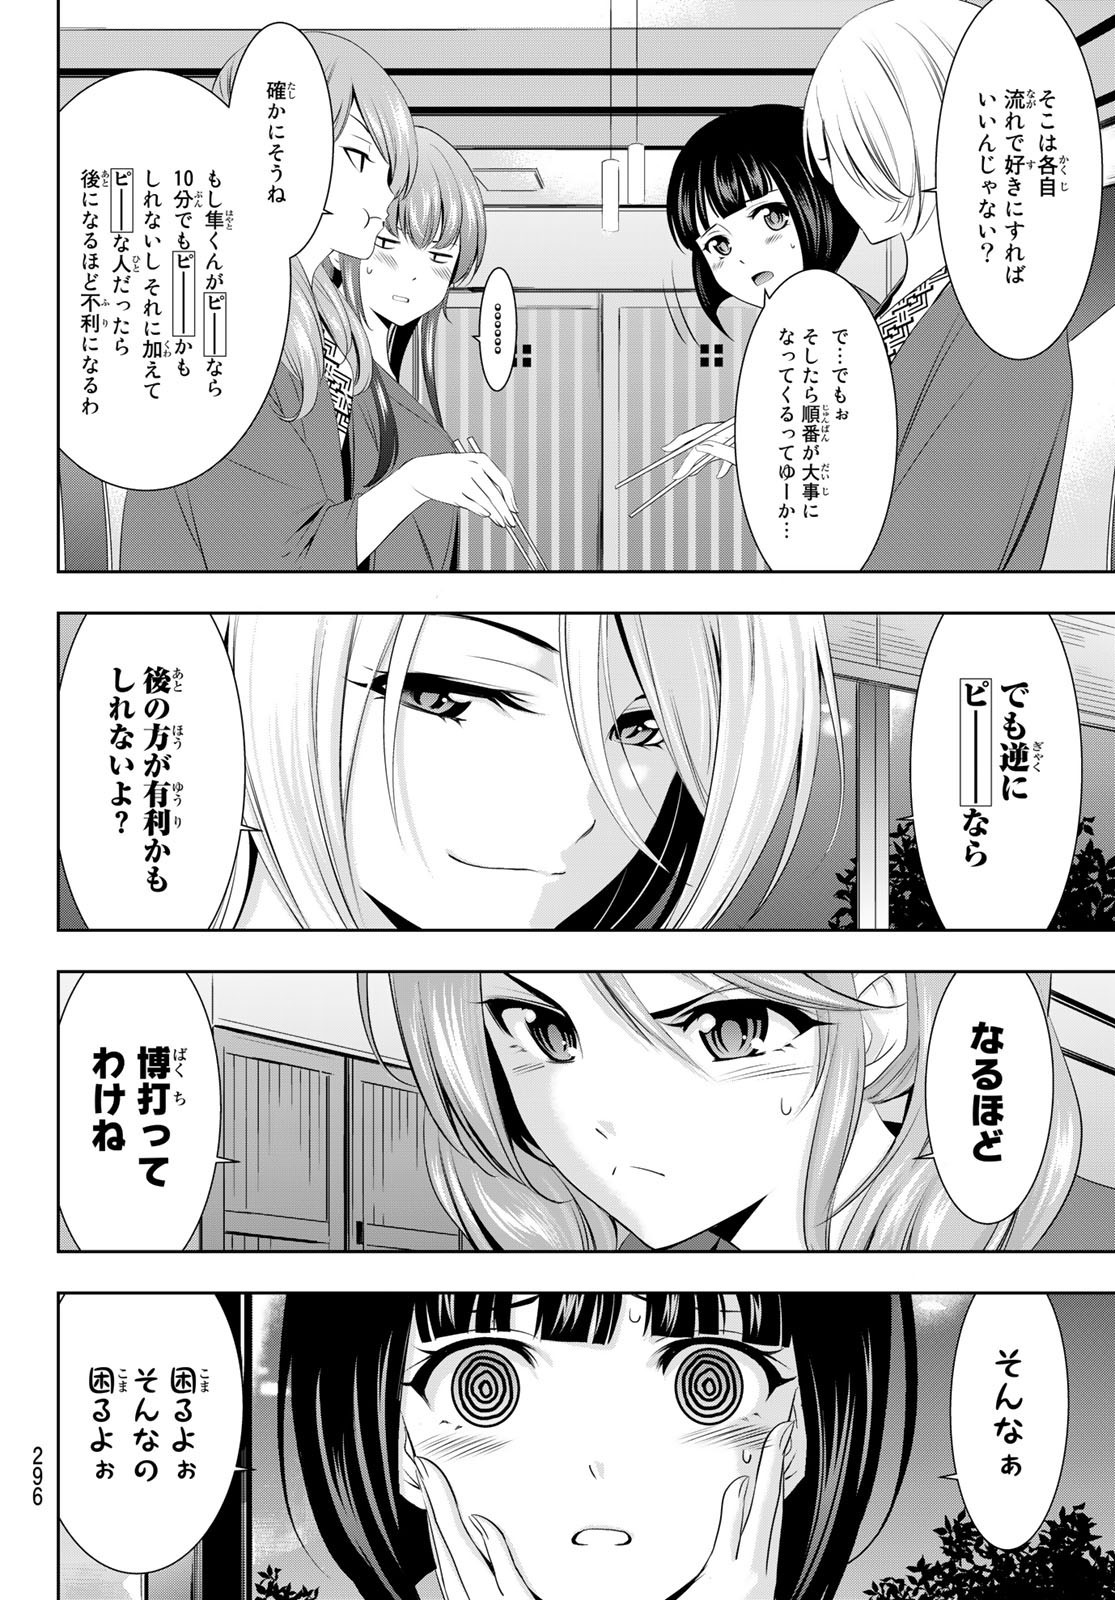 Goddess-Cafe-Terrace - Chapter 060 - Page 4